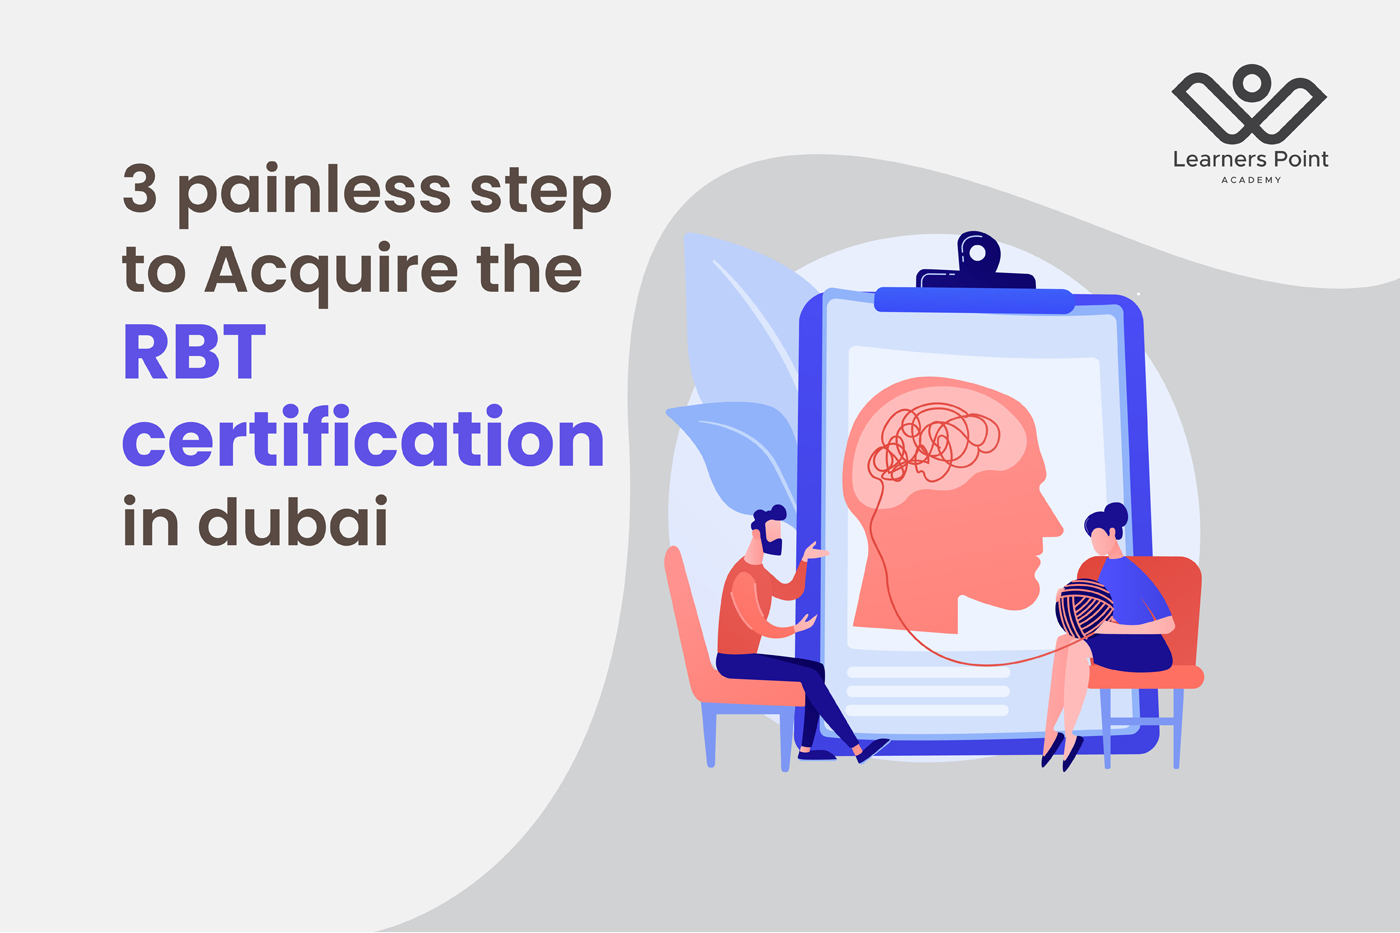 3 Painless Steps to Acquire the RBT Certification in Dubai